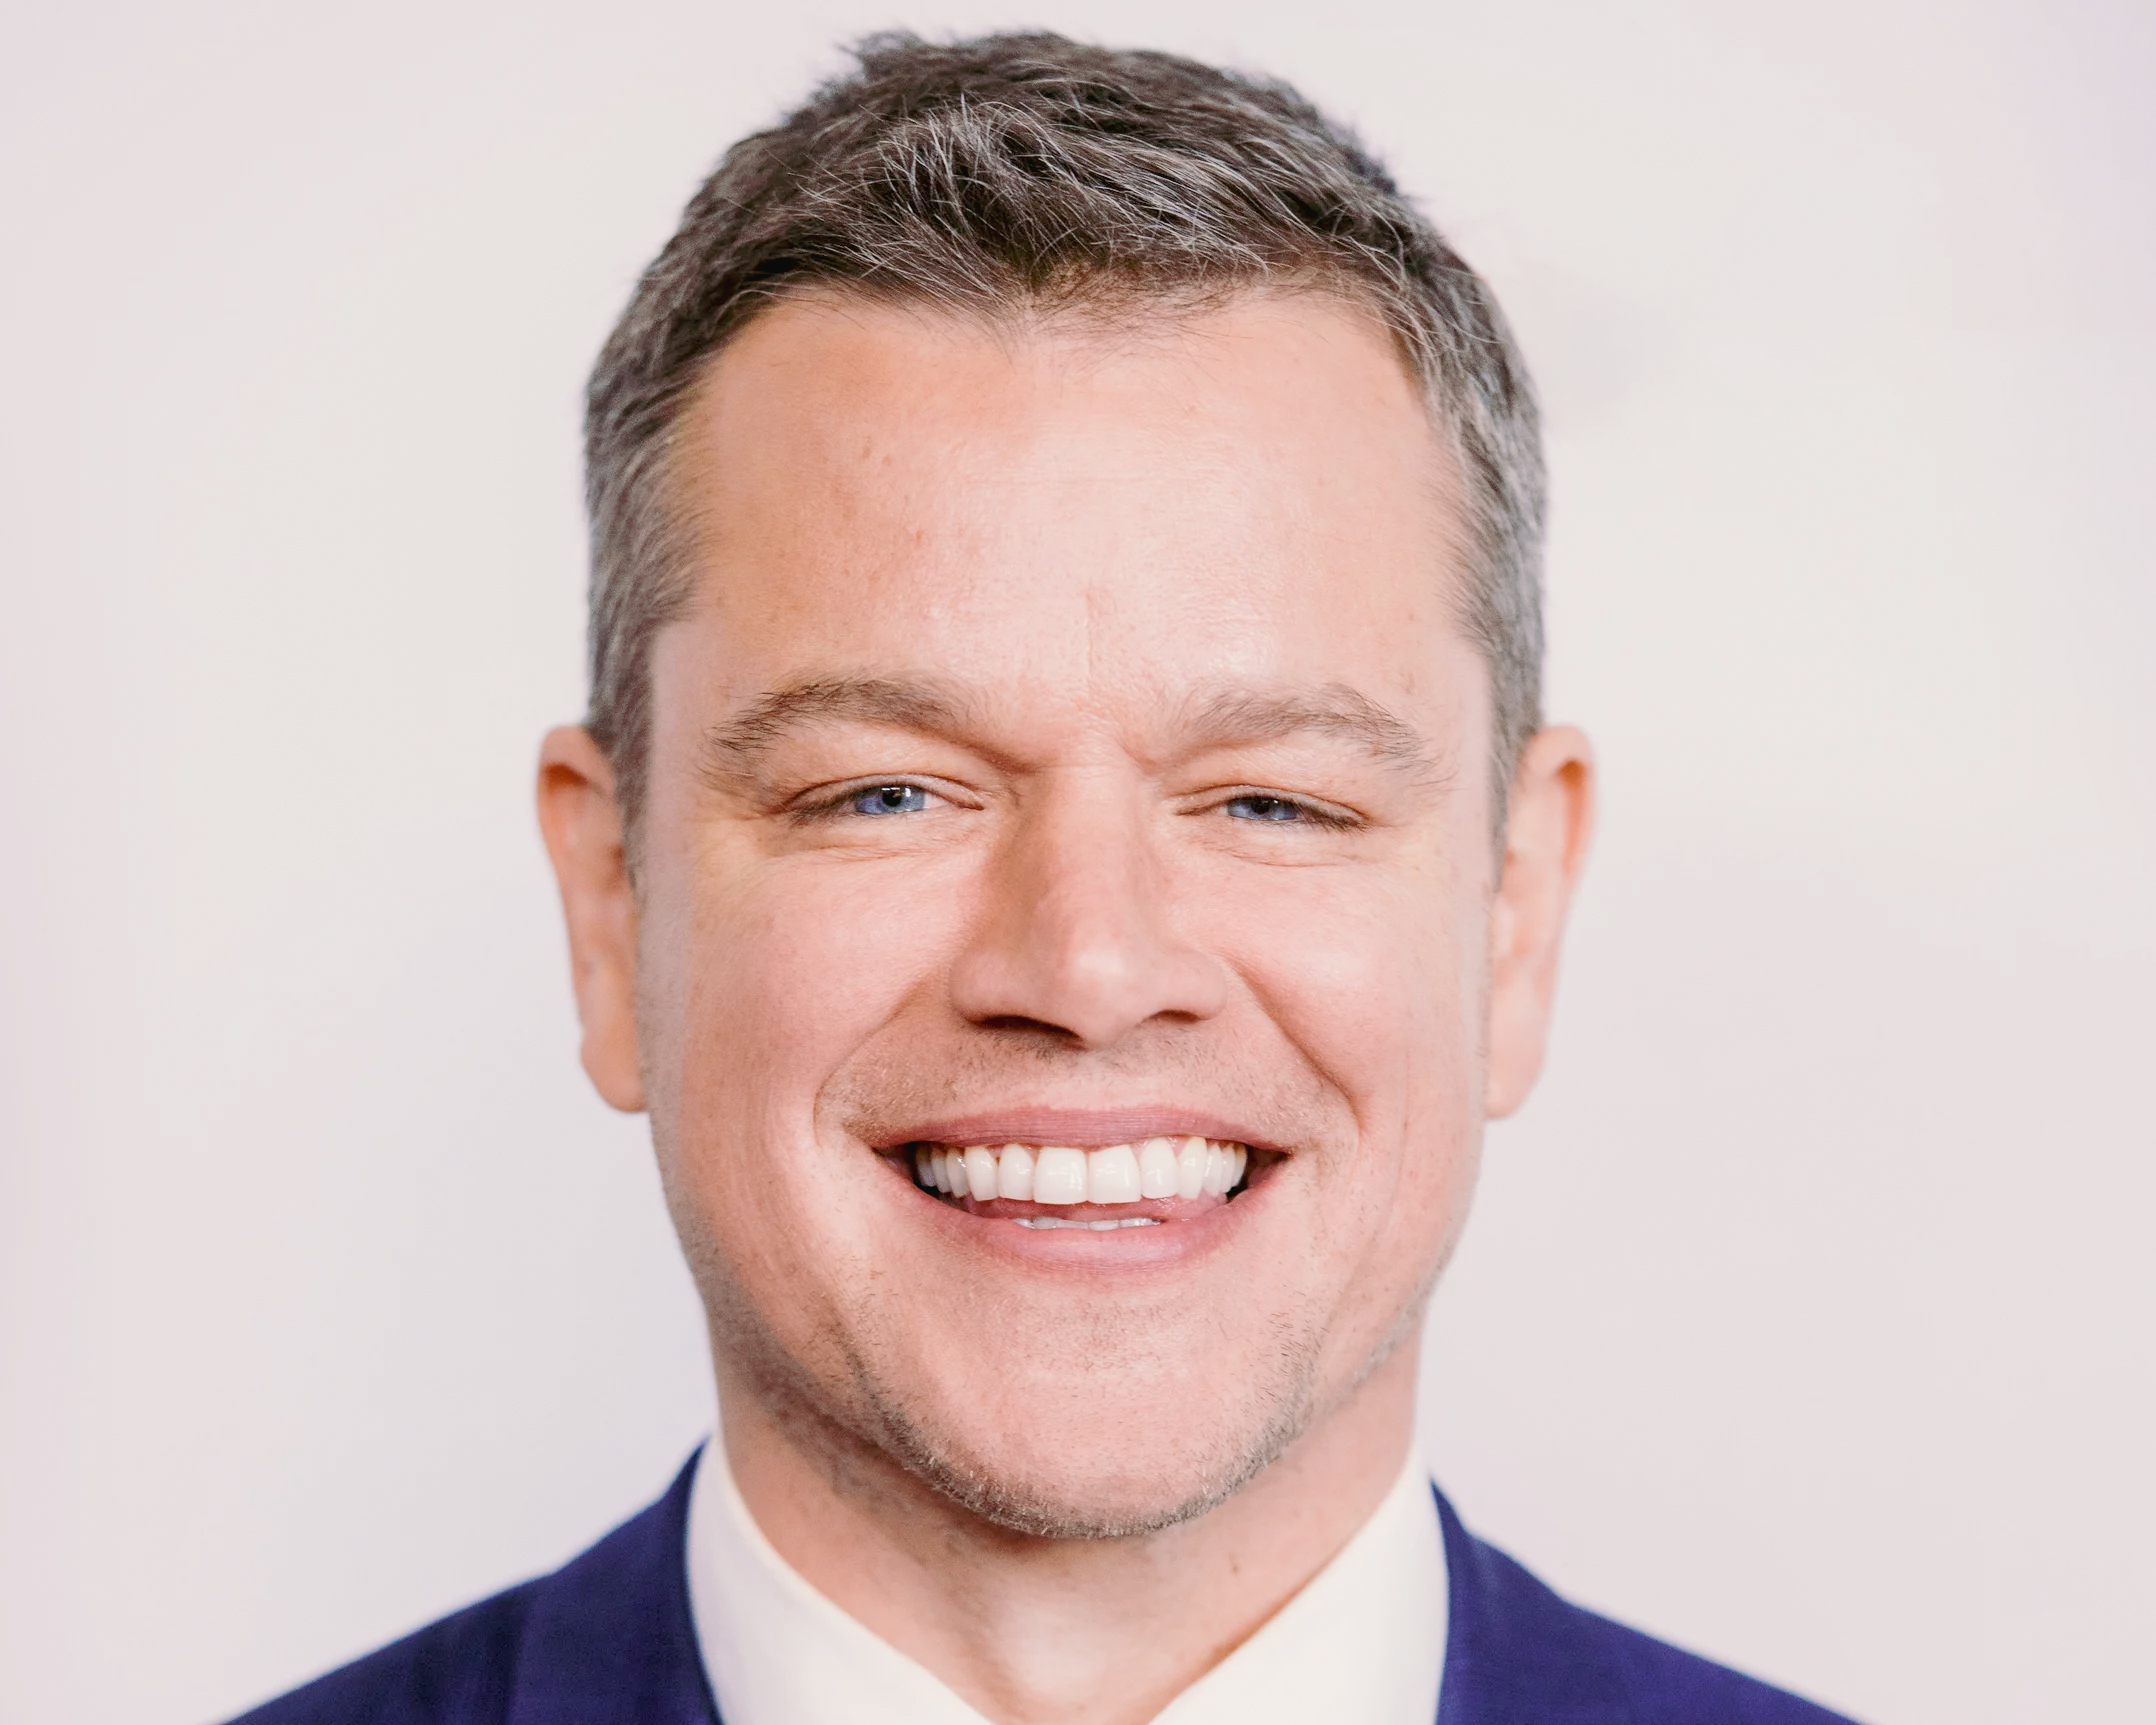 Crypto Firm Powered By Matt Damon Accidentally Sent $10 Million To Melbourne Woman